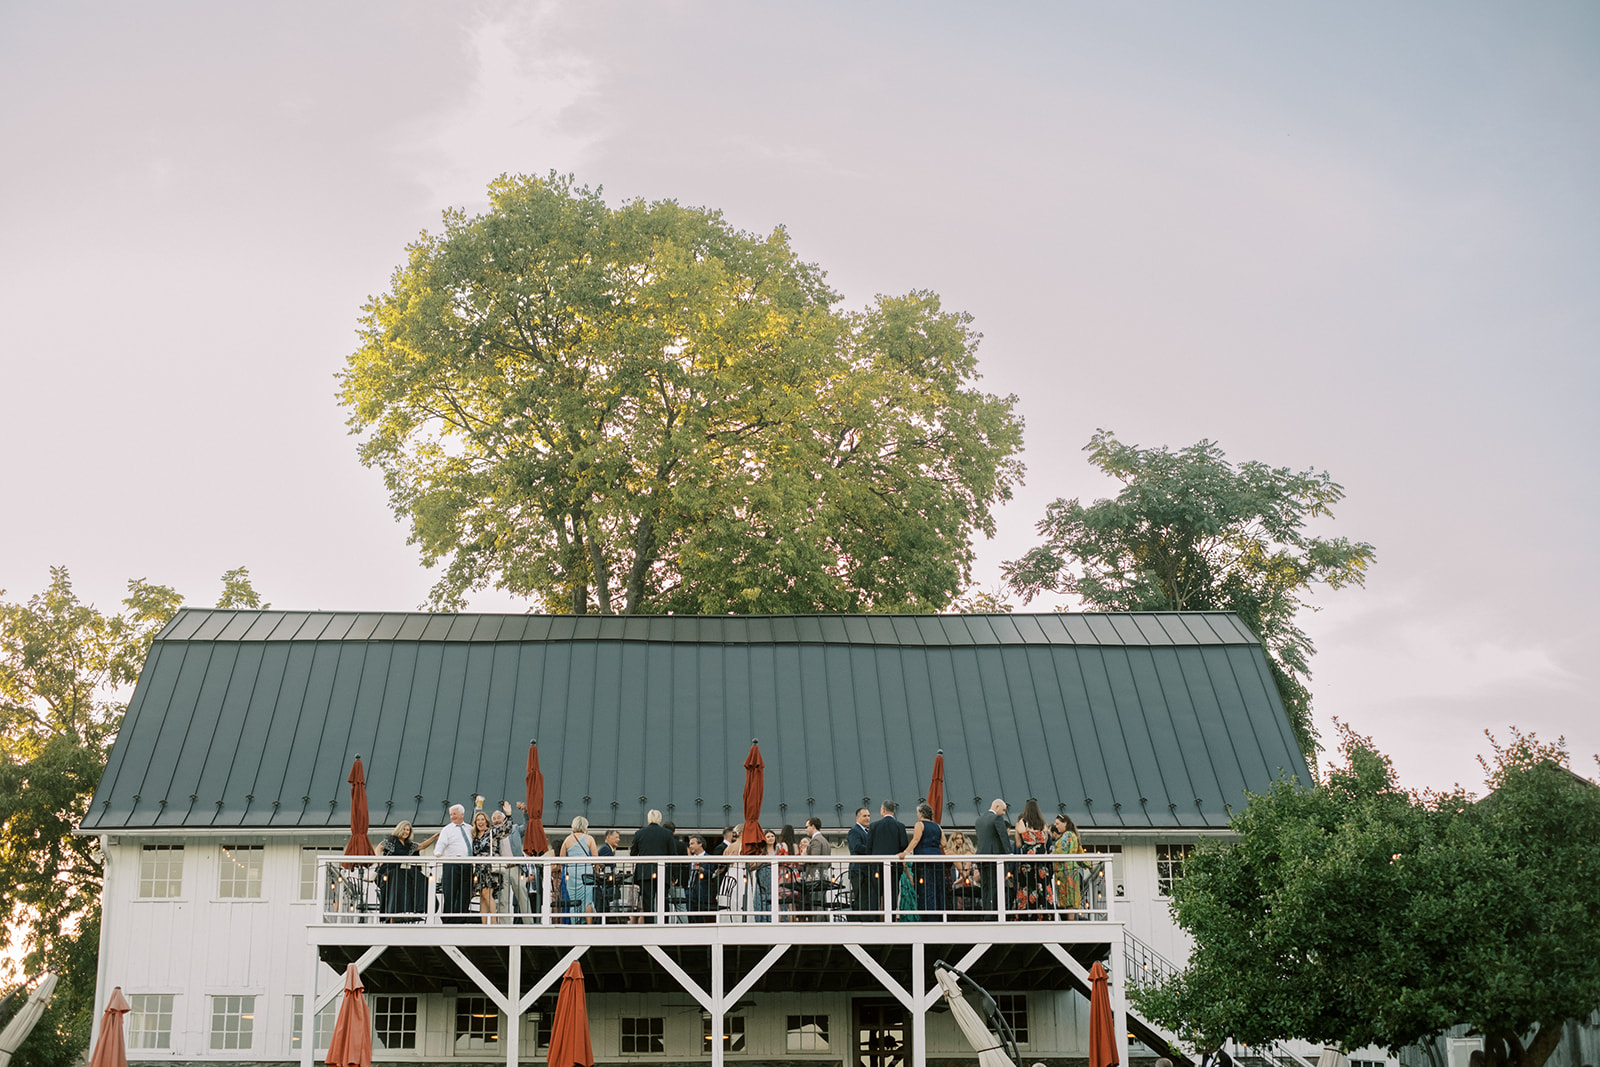 Guests during cocktail hour on the deck of an old barn at Virginia barn wedding